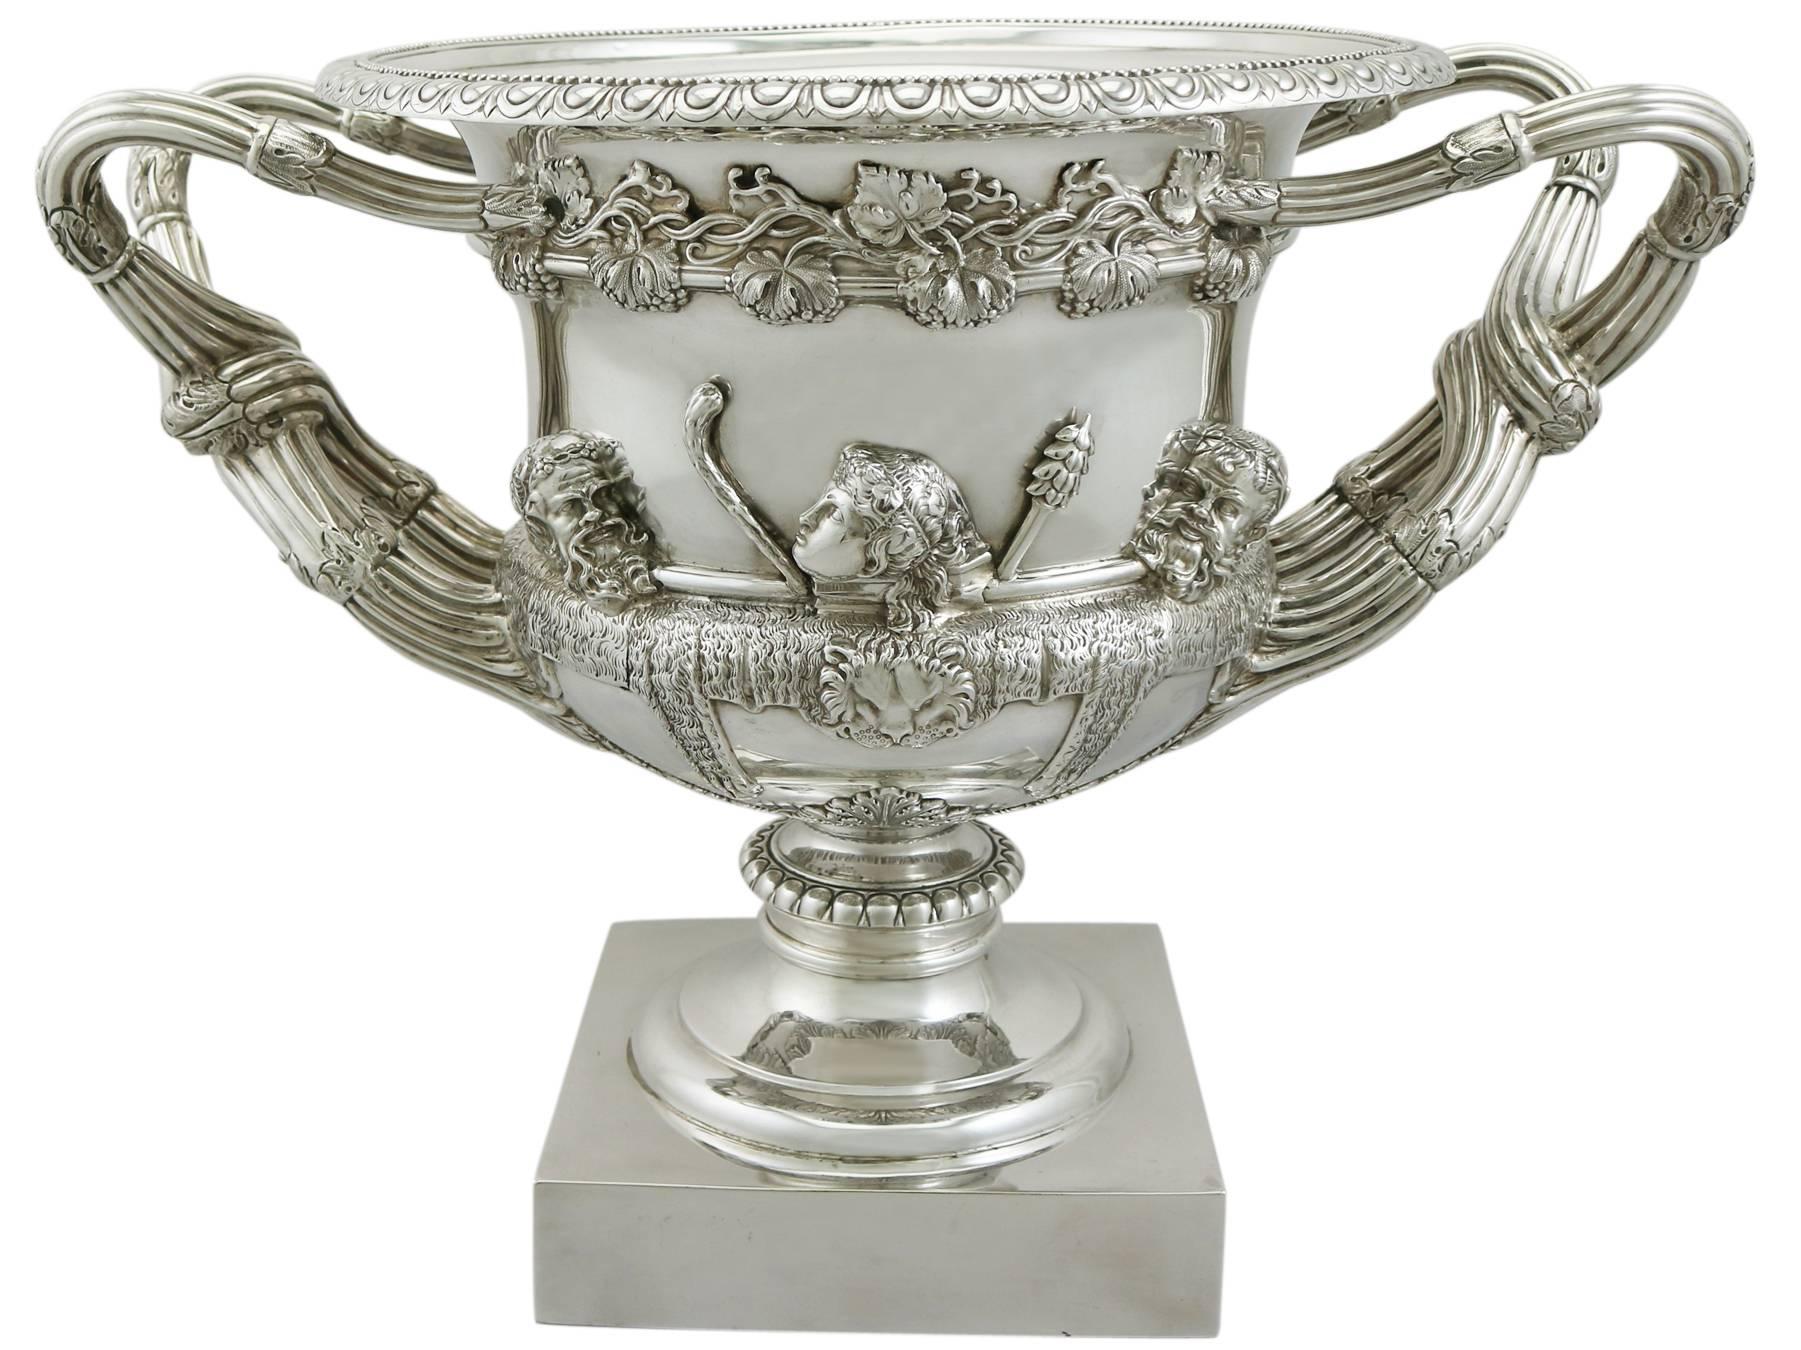 A magnificent, fine and impressive, large antique Edwardian English sterling silver Warwick vase; an addition to our silver presentation collection

This magnificent antique Edwardian sterling silver Warwick vase has a Campania shaped form onto a